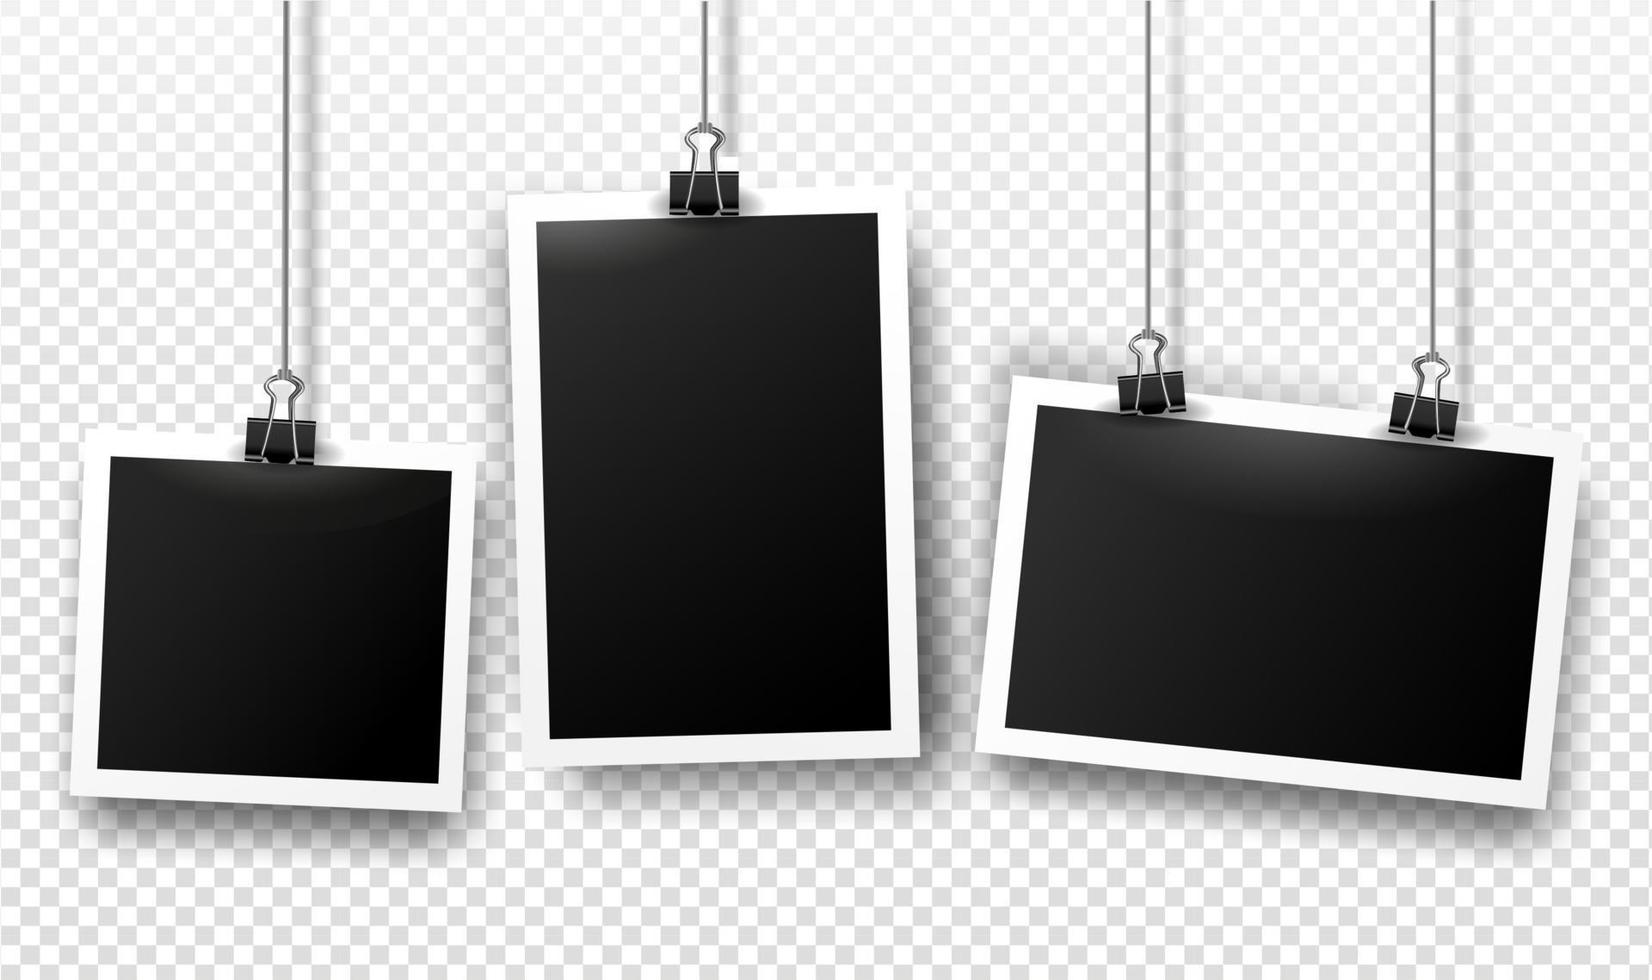 Photo frames hanging on binder clips with shadows. Vector templates